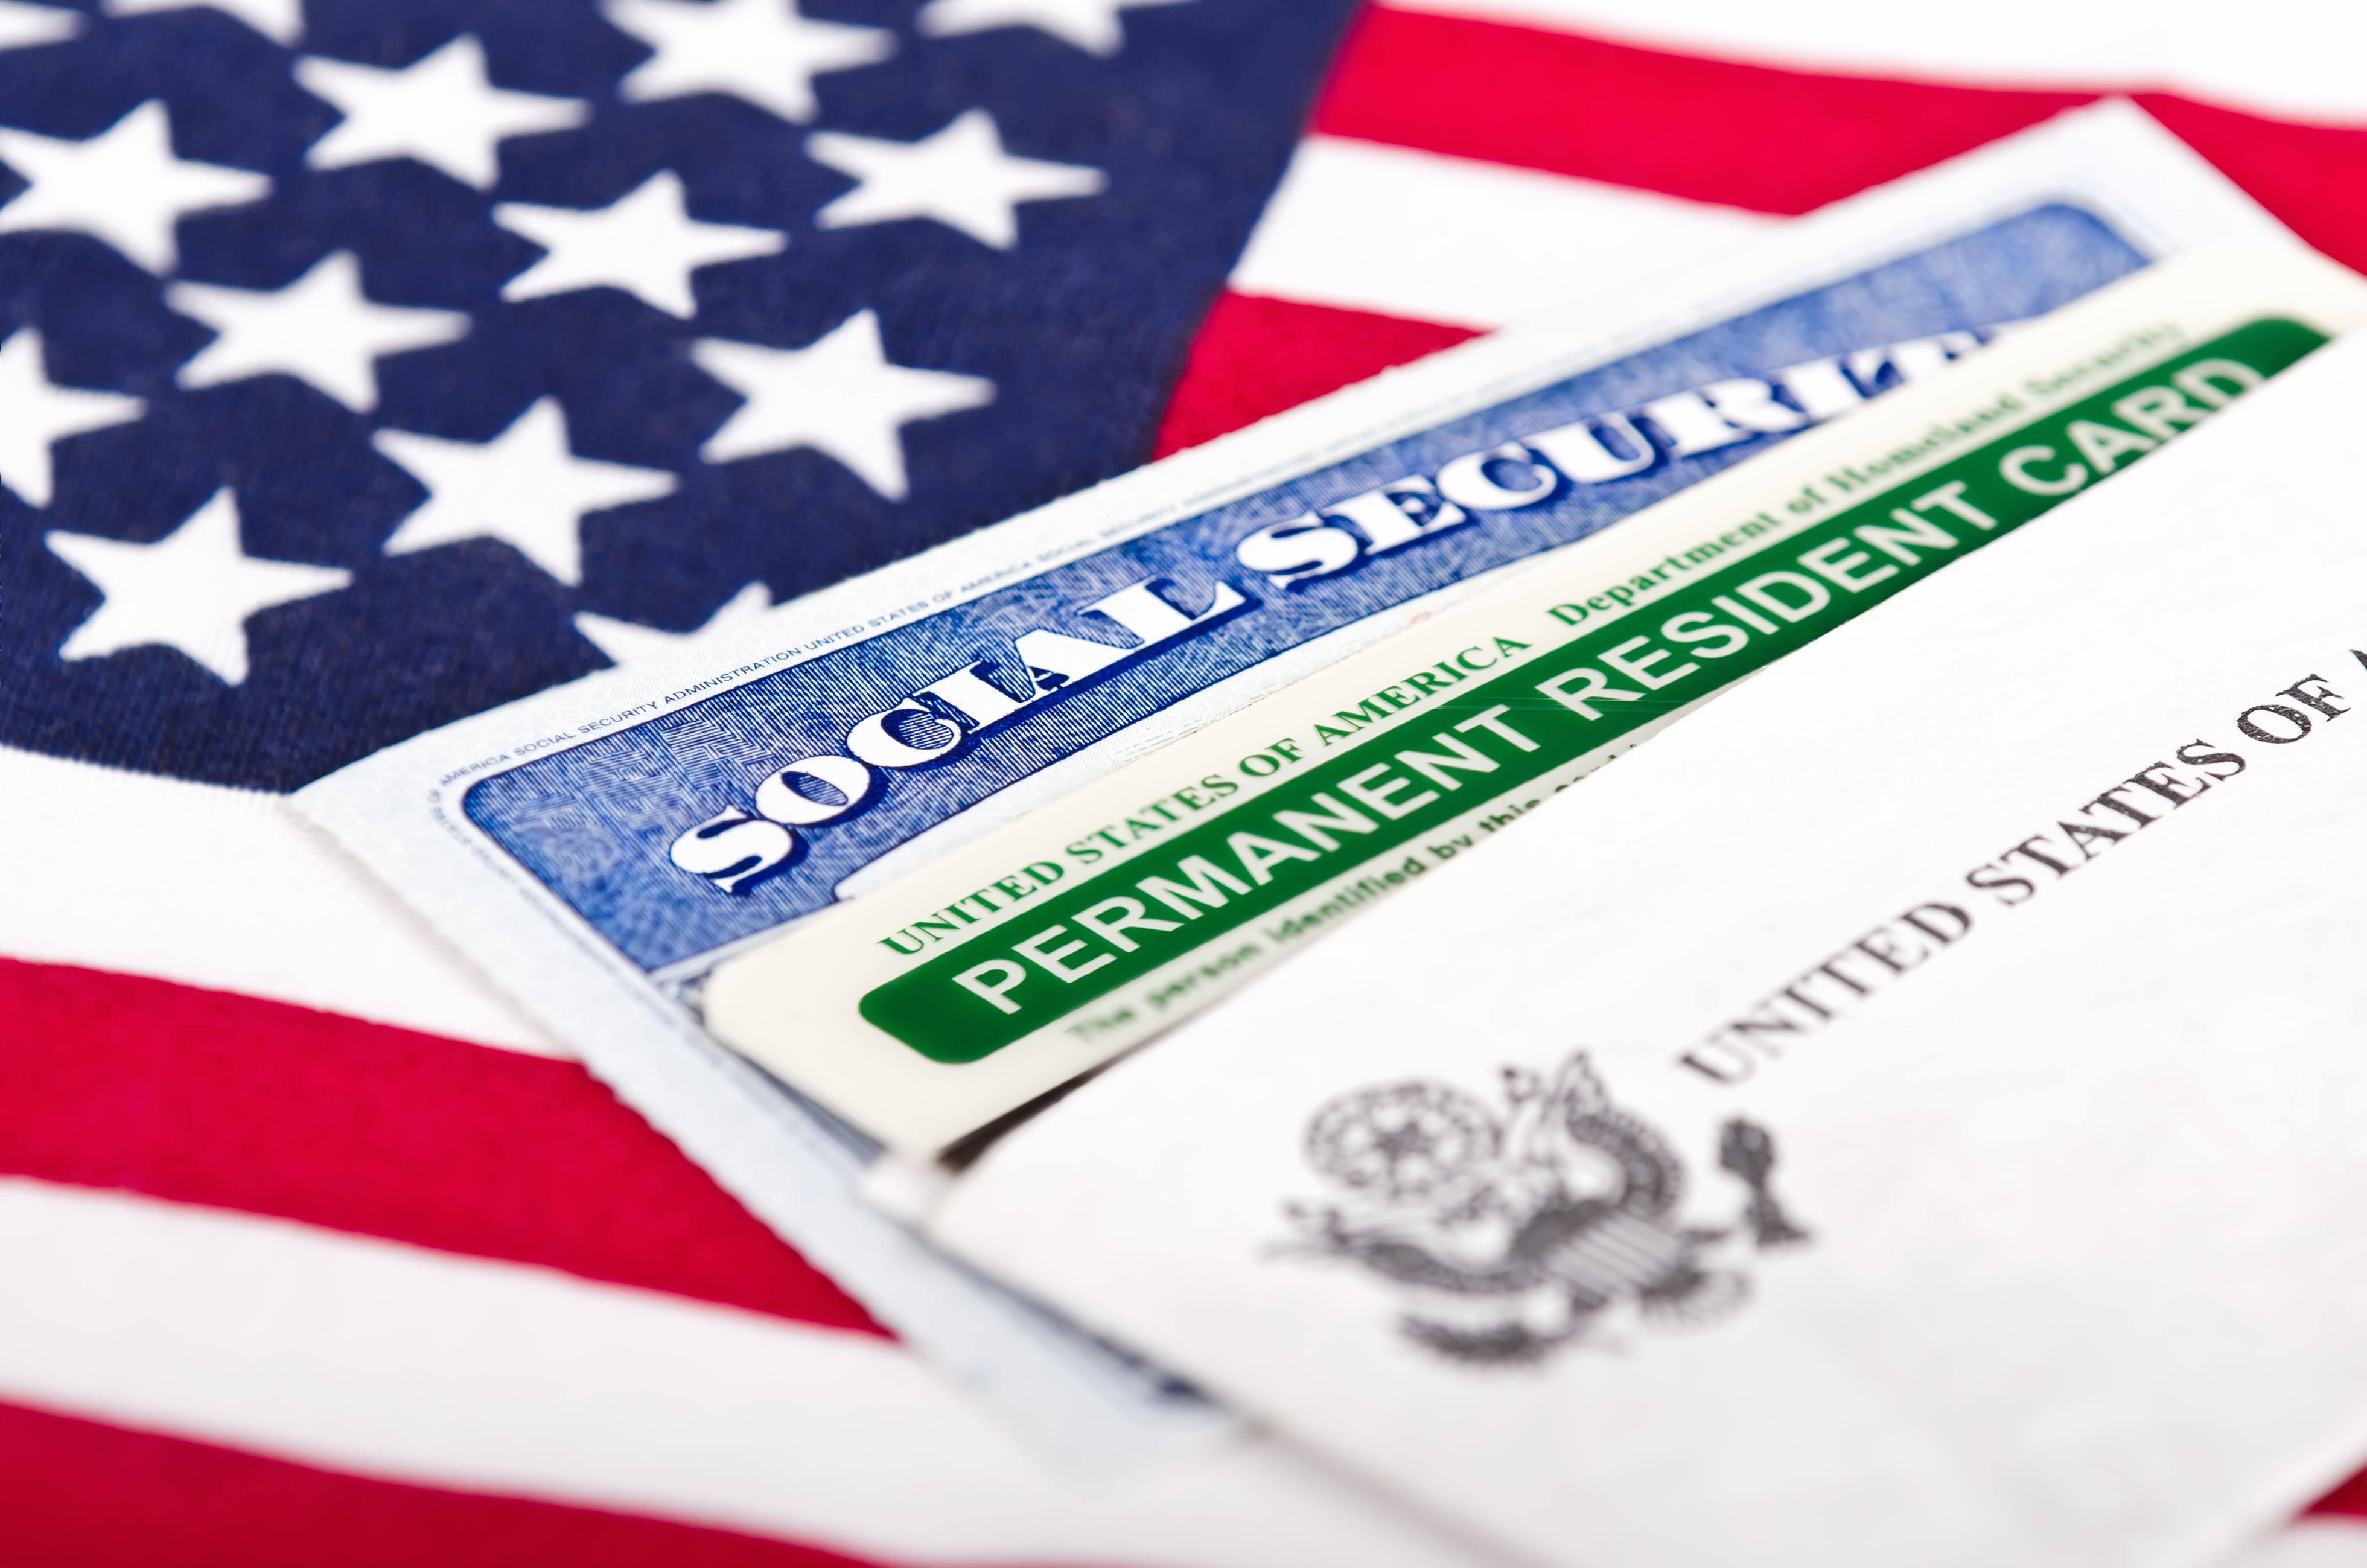 Legal service for immigration cards in Indo and Coachella United States